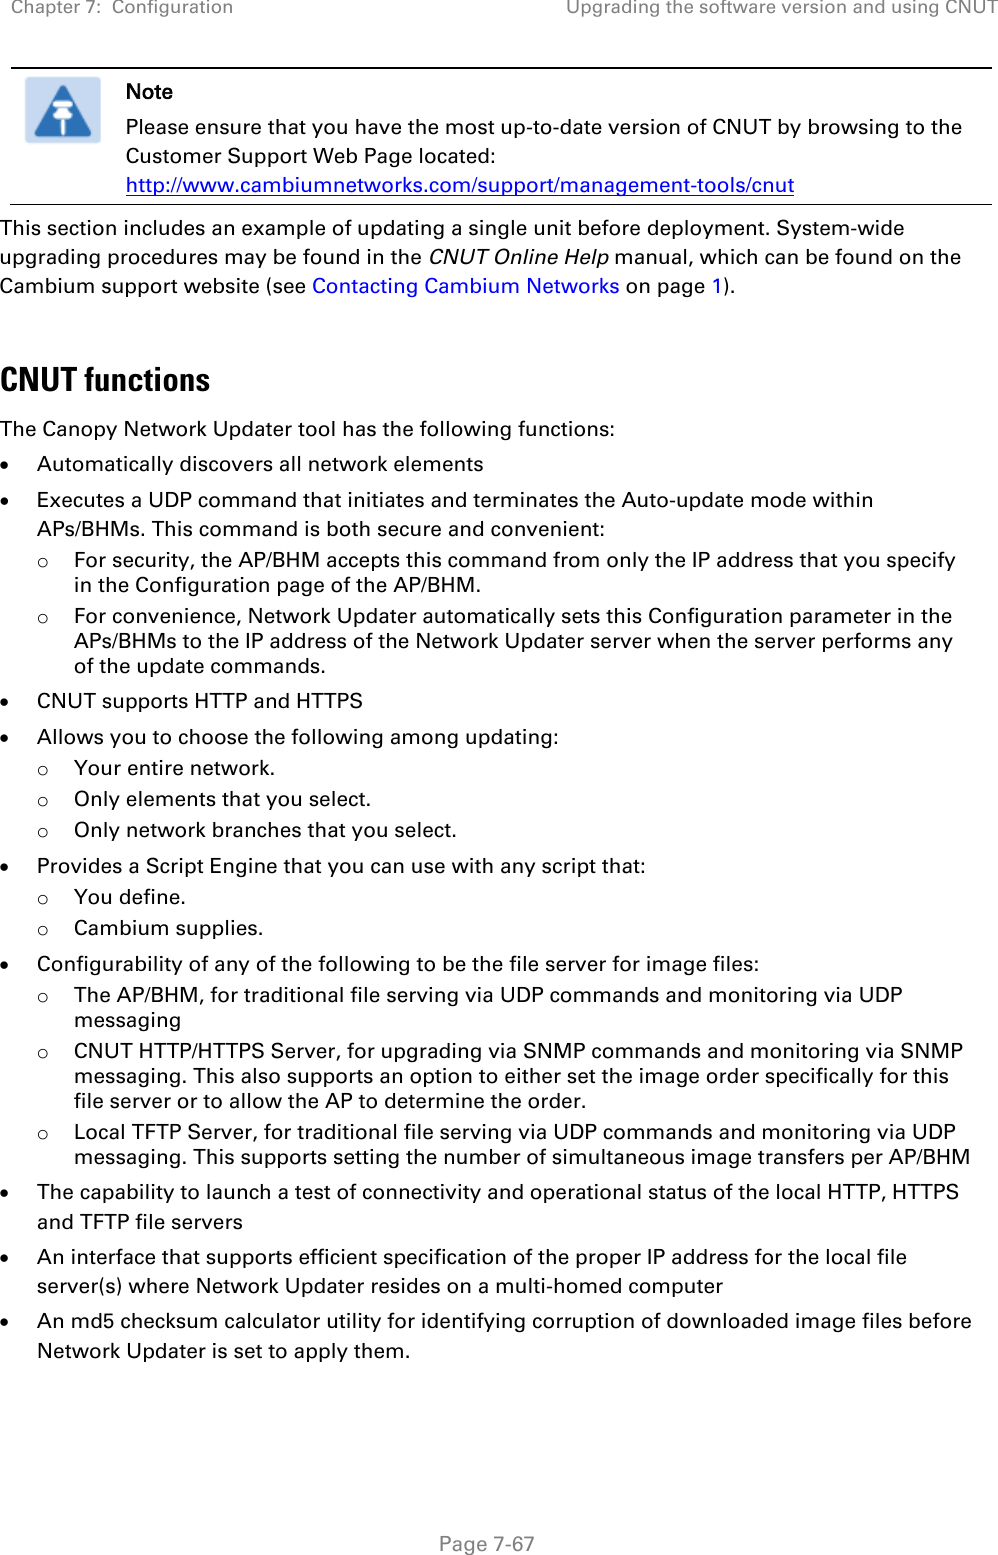 Chapter 7:  Configuration Upgrading the software version and using CNUT   Page 7-67  Note Please ensure that you have the most up-to-date version of CNUT by browsing to the Customer Support Web Page located: http://www.cambiumnetworks.com/support/management-tools/cnut This section includes an example of updating a single unit before deployment. System-wide upgrading procedures may be found in the CNUT Online Help manual, which can be found on the Cambium support website (see Contacting Cambium Networks on page 1).  CNUT functions The Canopy Network Updater tool has the following functions: • Automatically discovers all network elements • Executes a UDP command that initiates and terminates the Auto-update mode within APs/BHMs. This command is both secure and convenient: o For security, the AP/BHM accepts this command from only the IP address that you specify in the Configuration page of the AP/BHM.  o For convenience, Network Updater automatically sets this Configuration parameter in the APs/BHMs to the IP address of the Network Updater server when the server performs any of the update commands. • CNUT supports HTTP and HTTPS • Allows you to choose the following among updating: o Your entire network. o Only elements that you select. o Only network branches that you select. • Provides a Script Engine that you can use with any script that: o You define. o Cambium supplies. • Configurability of any of the following to be the file server for image files: o The AP/BHM, for traditional file serving via UDP commands and monitoring via UDP messaging o CNUT HTTP/HTTPS Server, for upgrading via SNMP commands and monitoring via SNMP messaging. This also supports an option to either set the image order specifically for this file server or to allow the AP to determine the order. o Local TFTP Server, for traditional file serving via UDP commands and monitoring via UDP messaging. This supports setting the number of simultaneous image transfers per AP/BHM • The capability to launch a test of connectivity and operational status of the local HTTP, HTTPS and TFTP file servers • An interface that supports efficient specification of the proper IP address for the local file server(s) where Network Updater resides on a multi-homed computer • An md5 checksum calculator utility for identifying corruption of downloaded image files before Network Updater is set to apply them. 